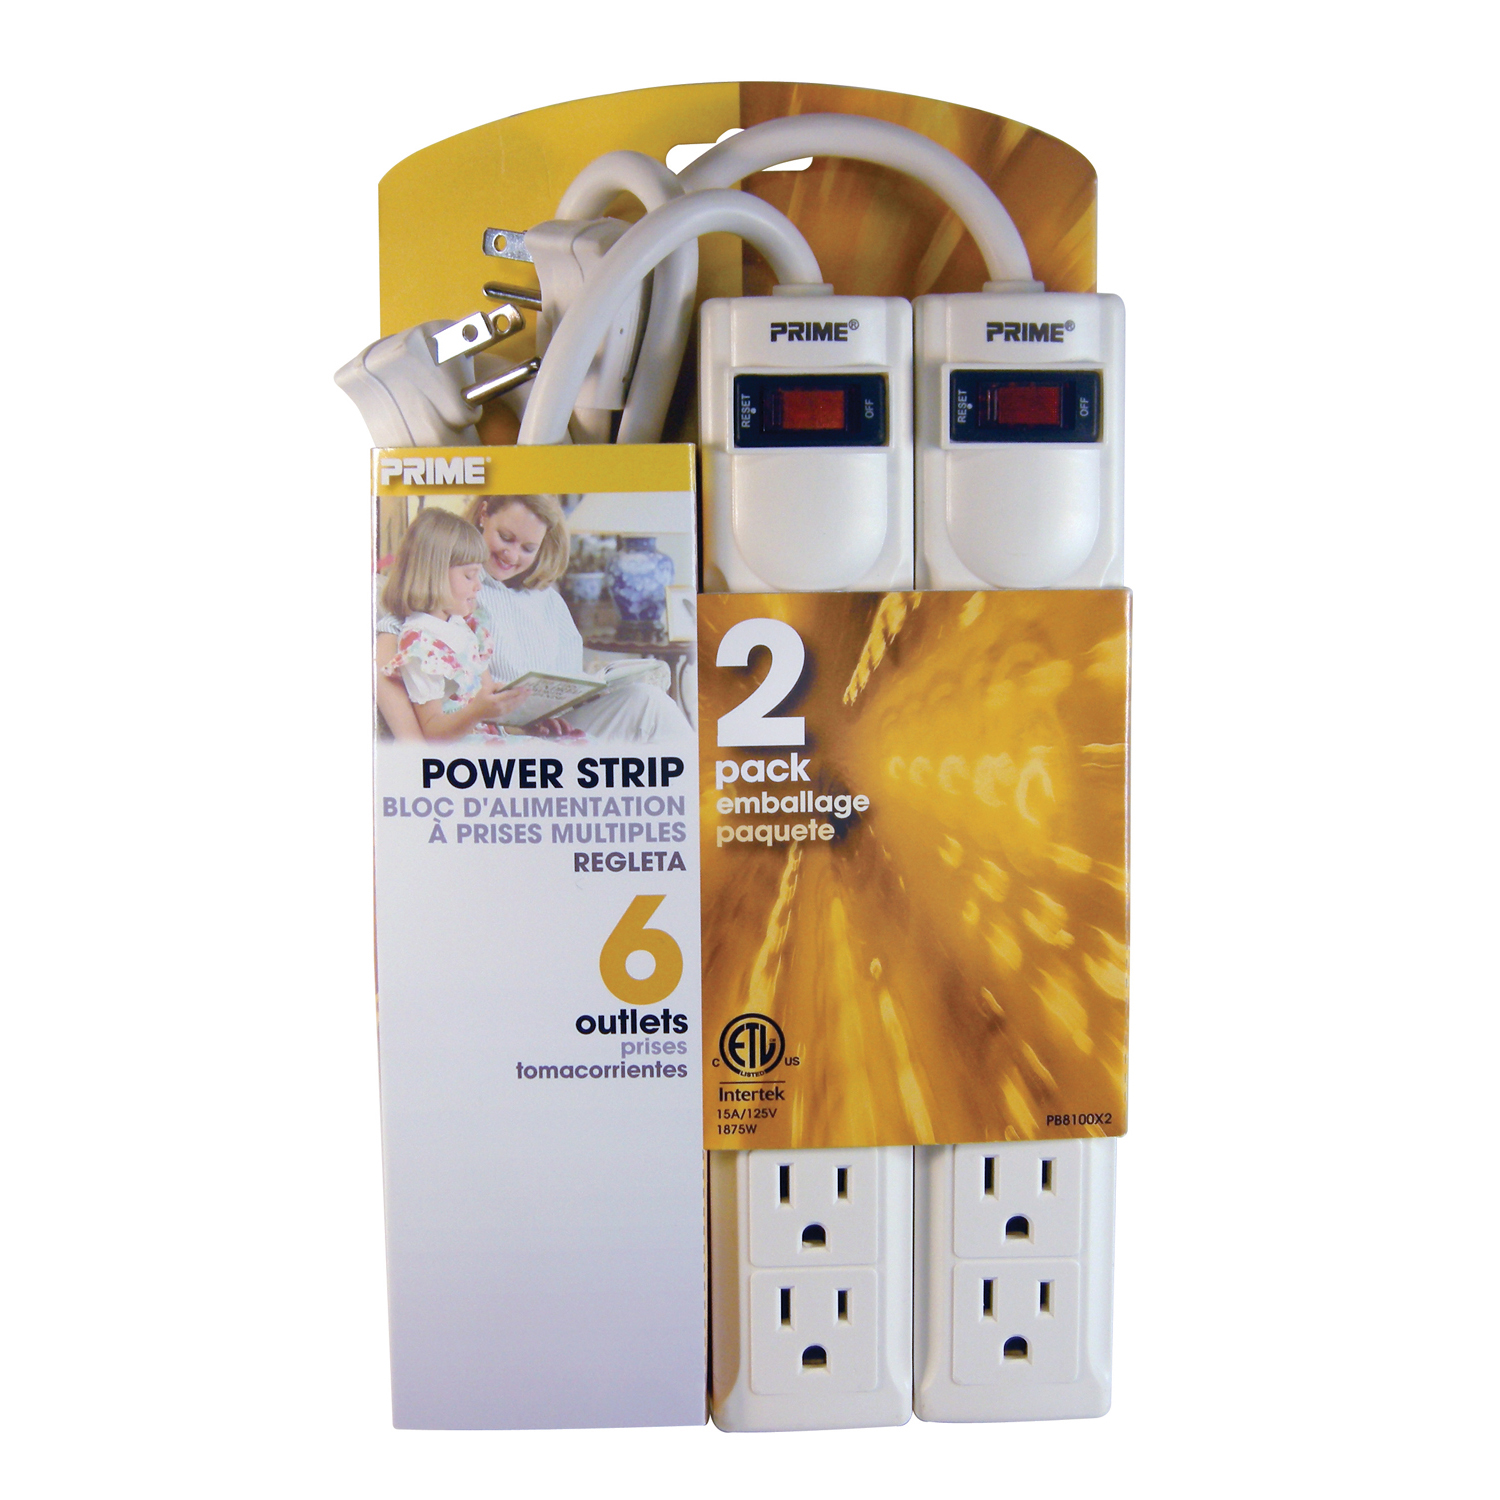 PB8100X2 Six-Outlet Power Strip With 3-Foot Cord, 2 Pack